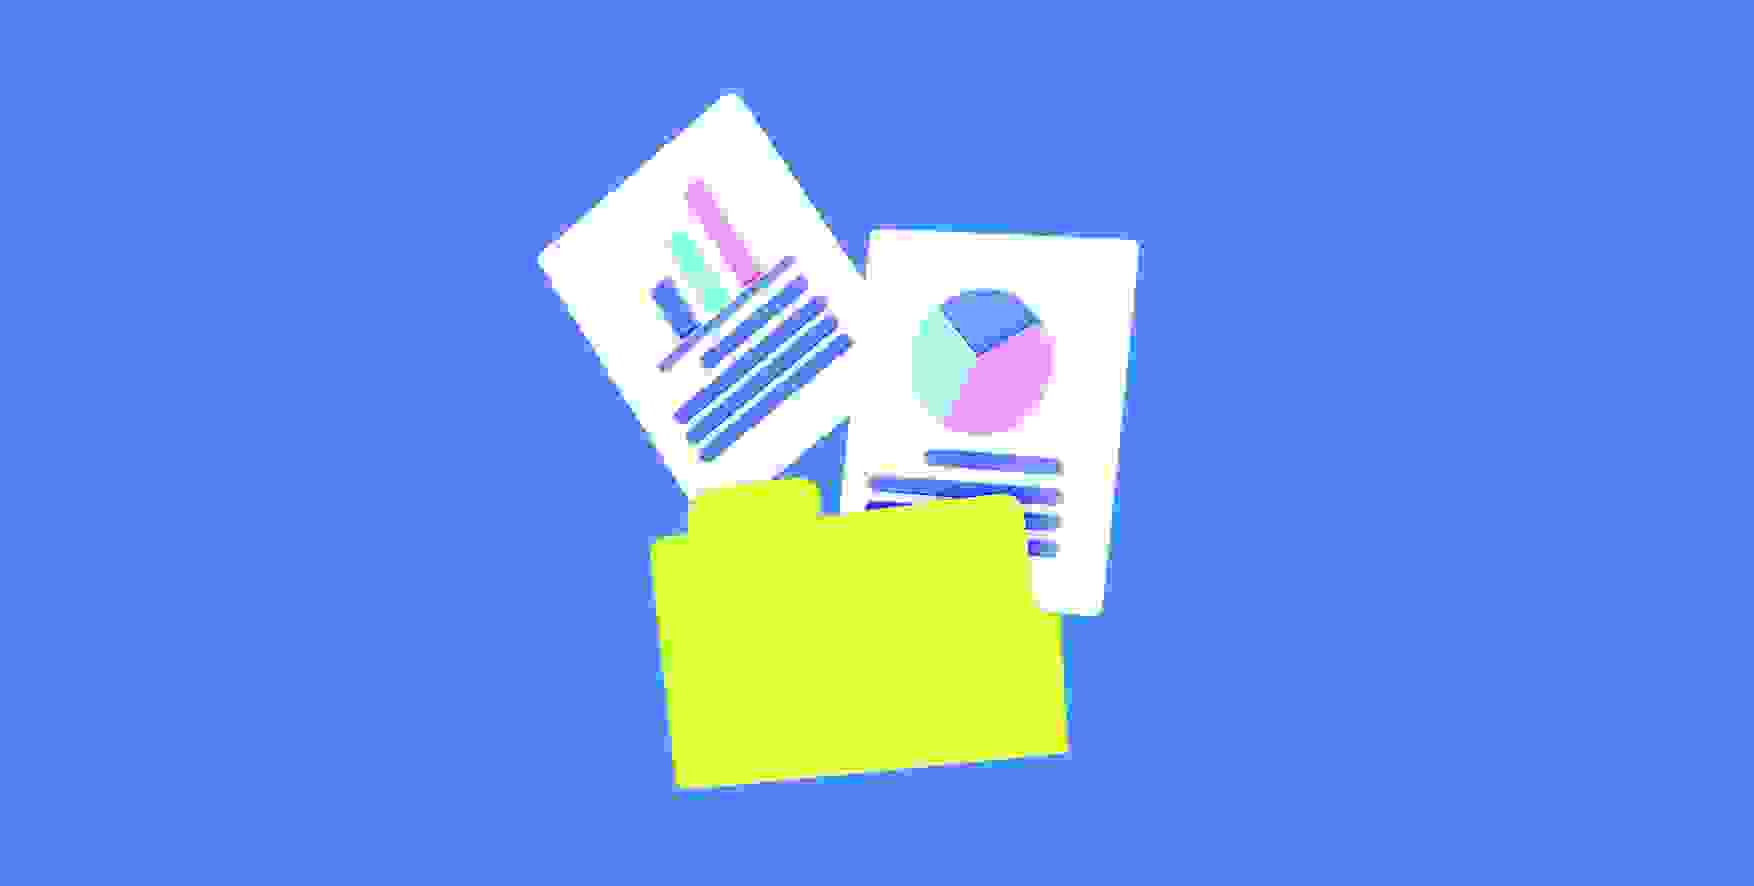 analytical data graphs on sheets of paper